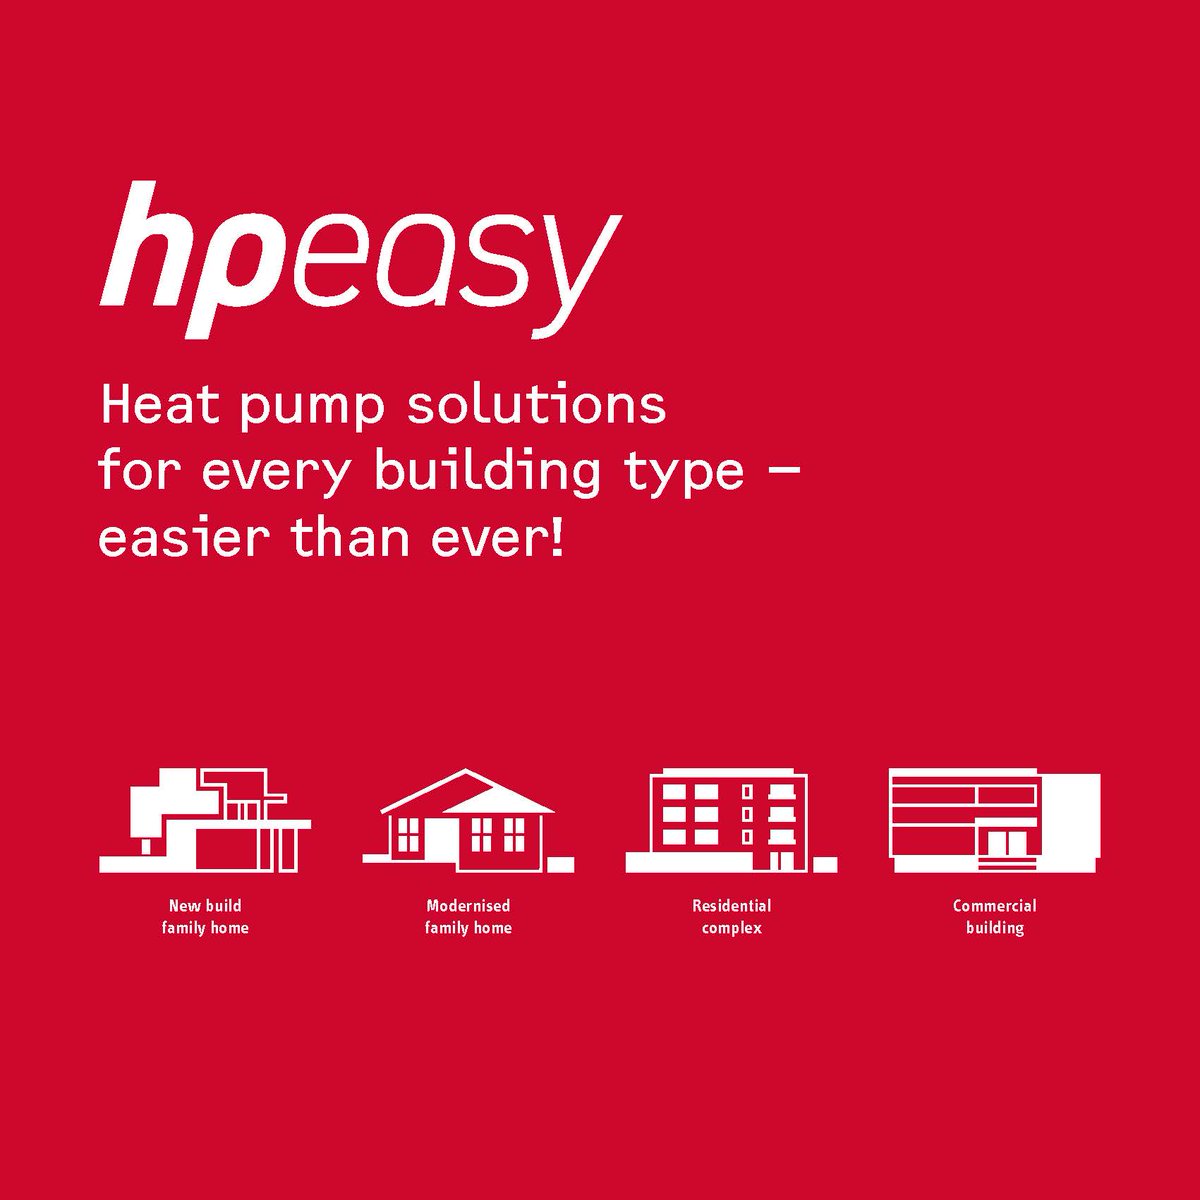 Our HPeasy concept makes  business more profitable and less stressful. Call us today and join us as a partner! 
 
#heatpumps #heatpumptechnology #installer #heatingengineer #heatingandcooling #heatingsystem